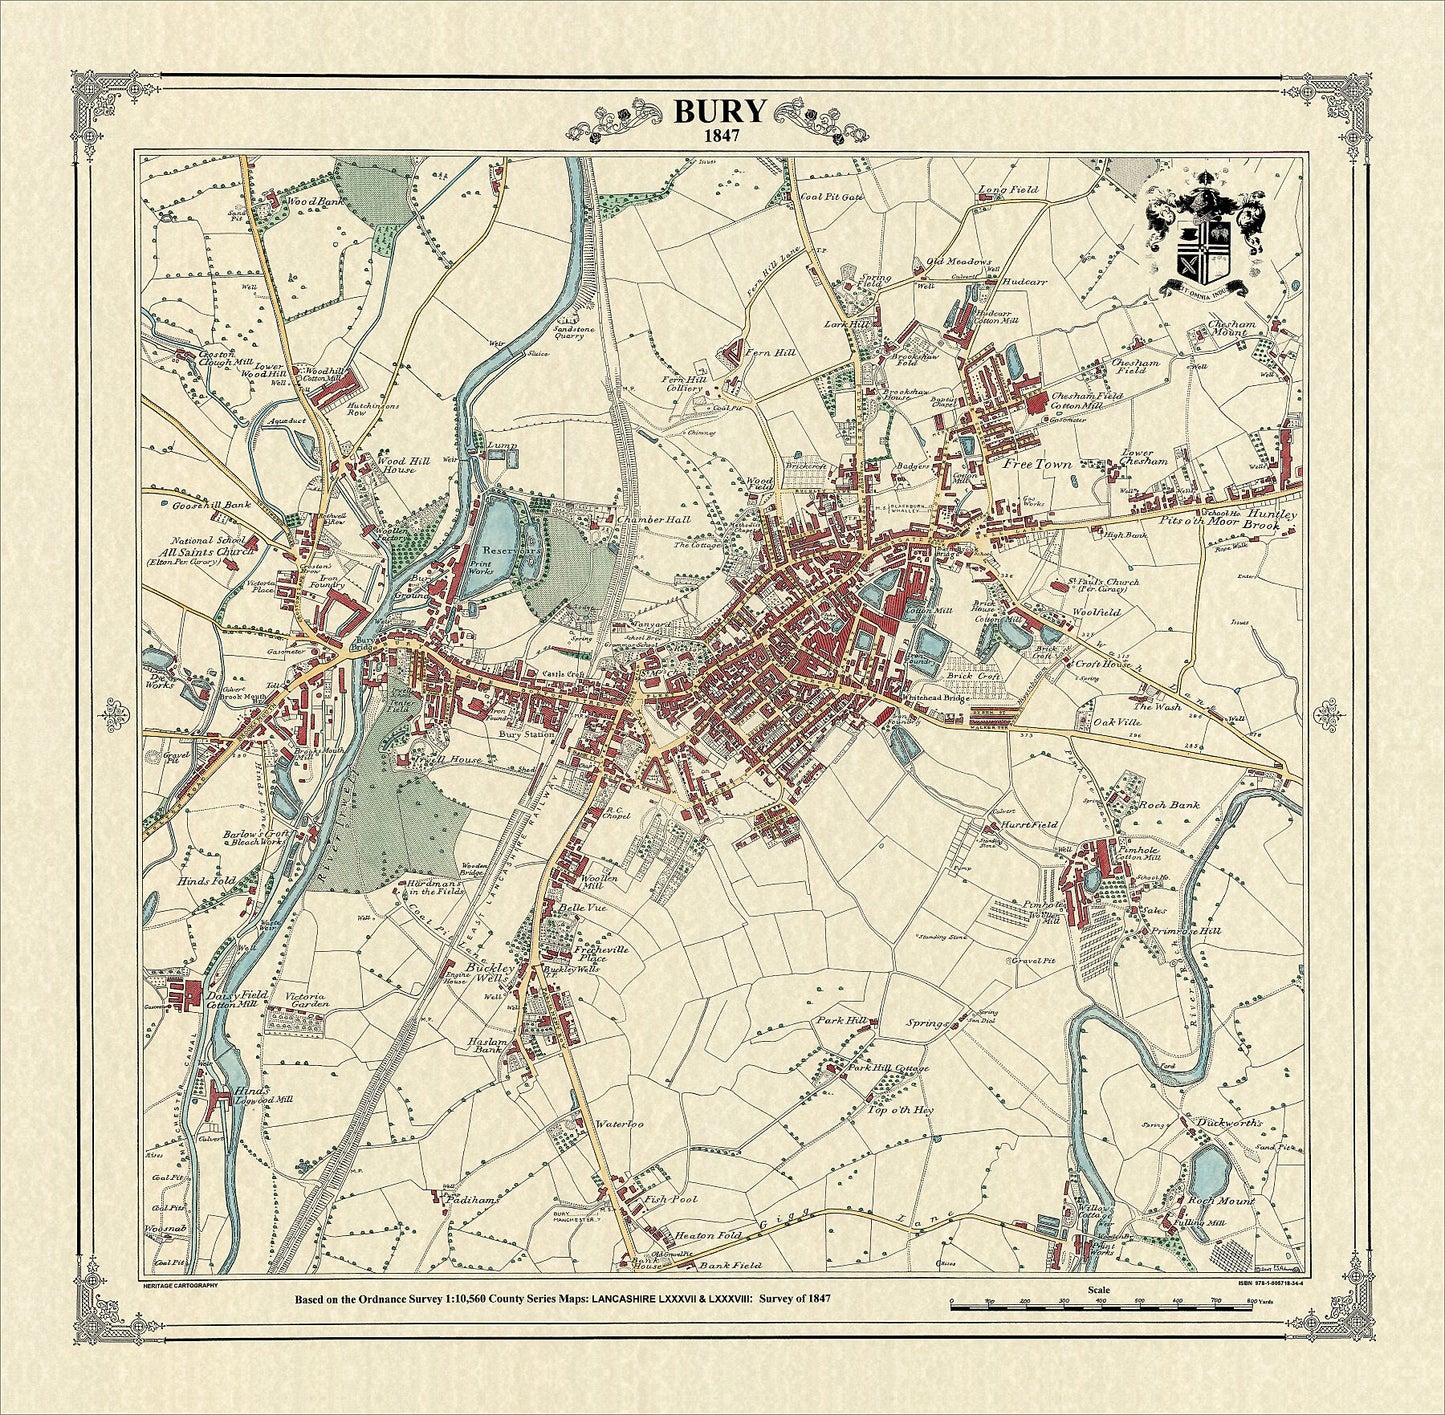 Coloured Victorian map of Bury in 1847 by Peter J Adams of Heritage Cartography